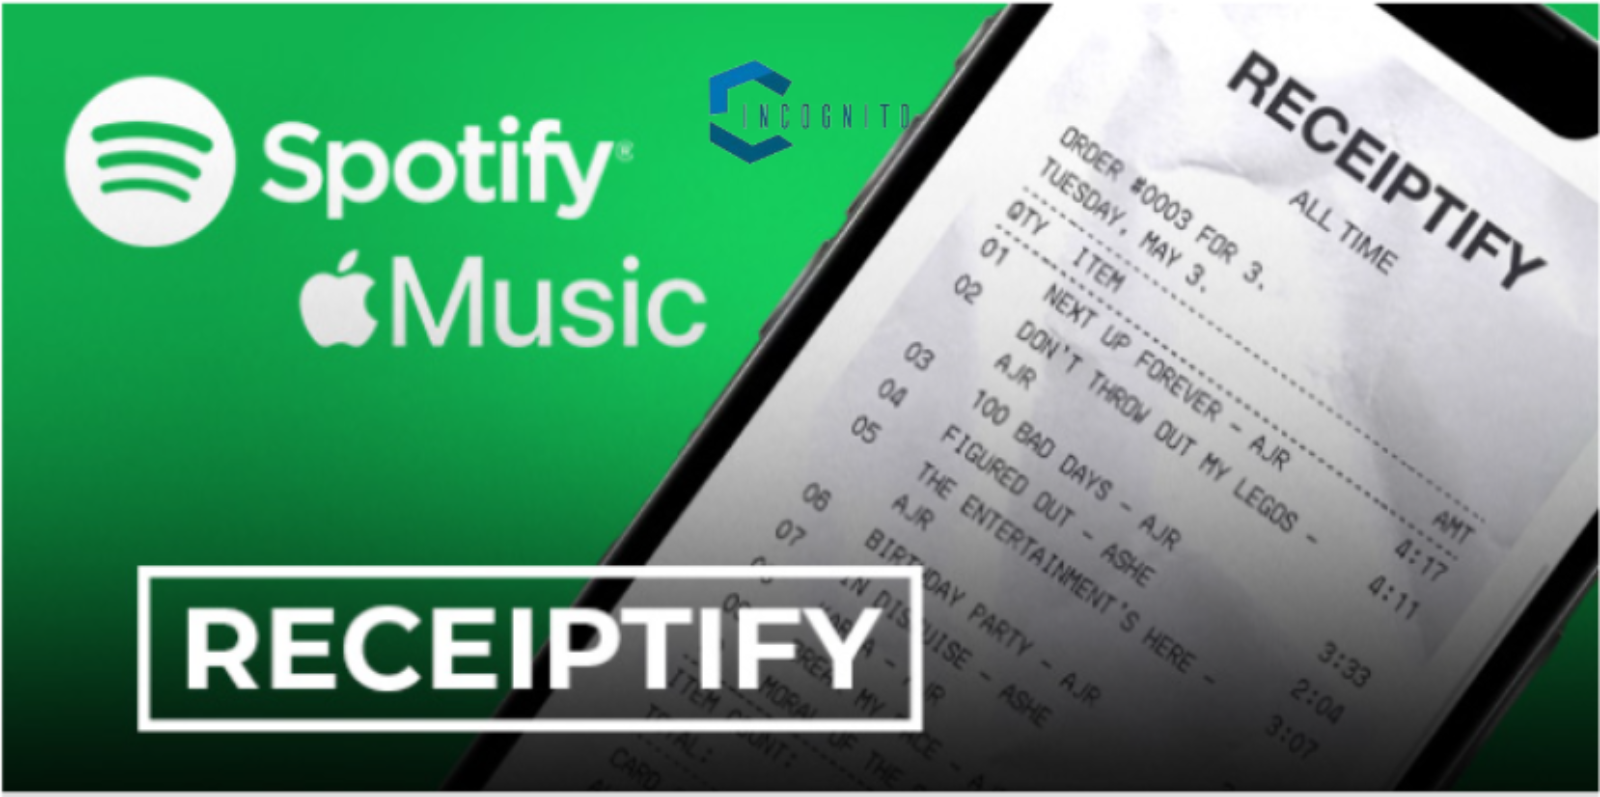 Use Spotify Receipt To Amplify Your Music Listening